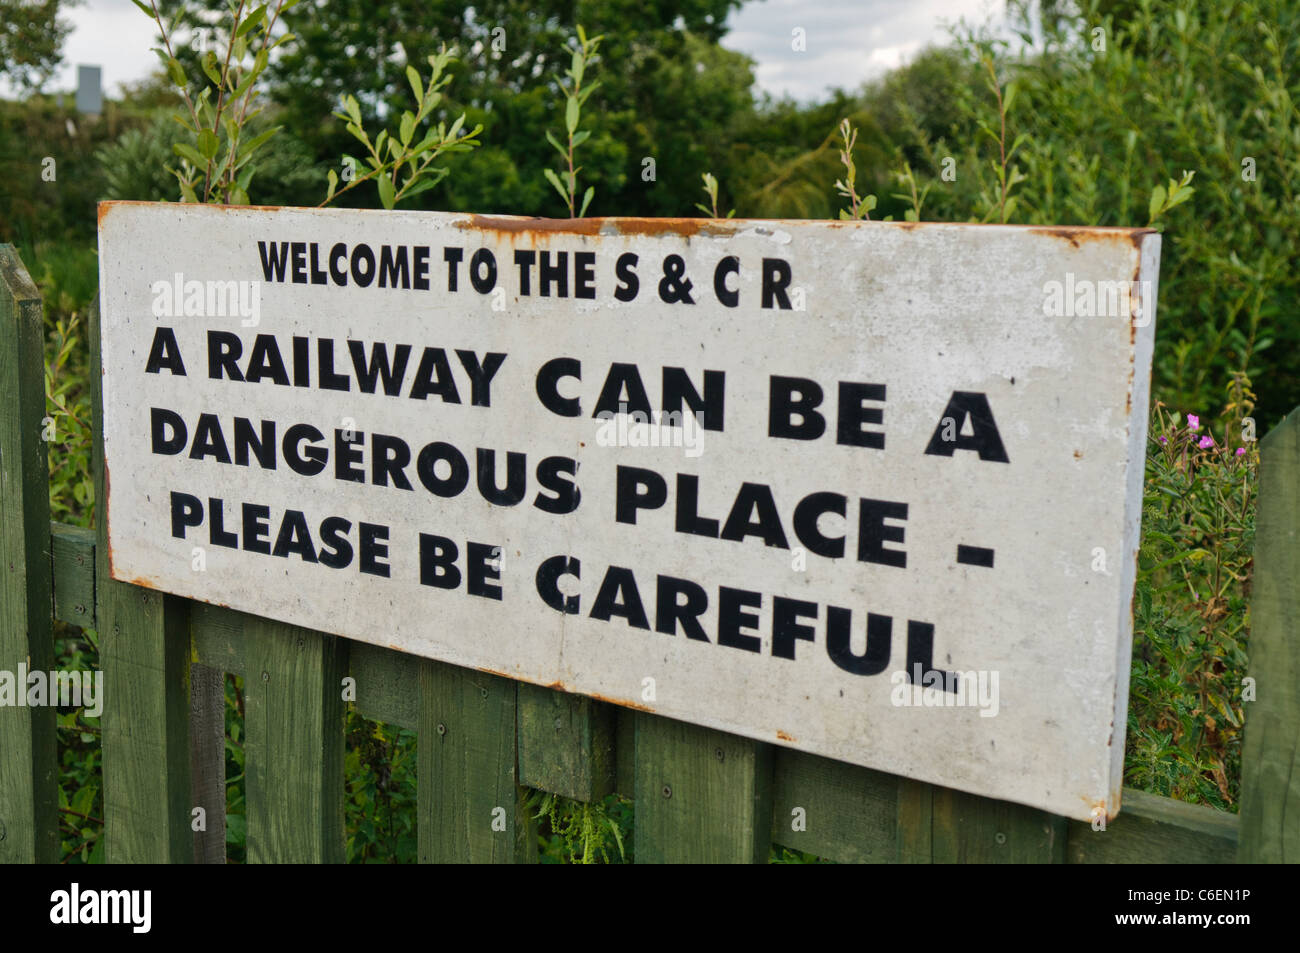 Sign warning passengers and visitors to be careful near the railway tracks Stock Photo